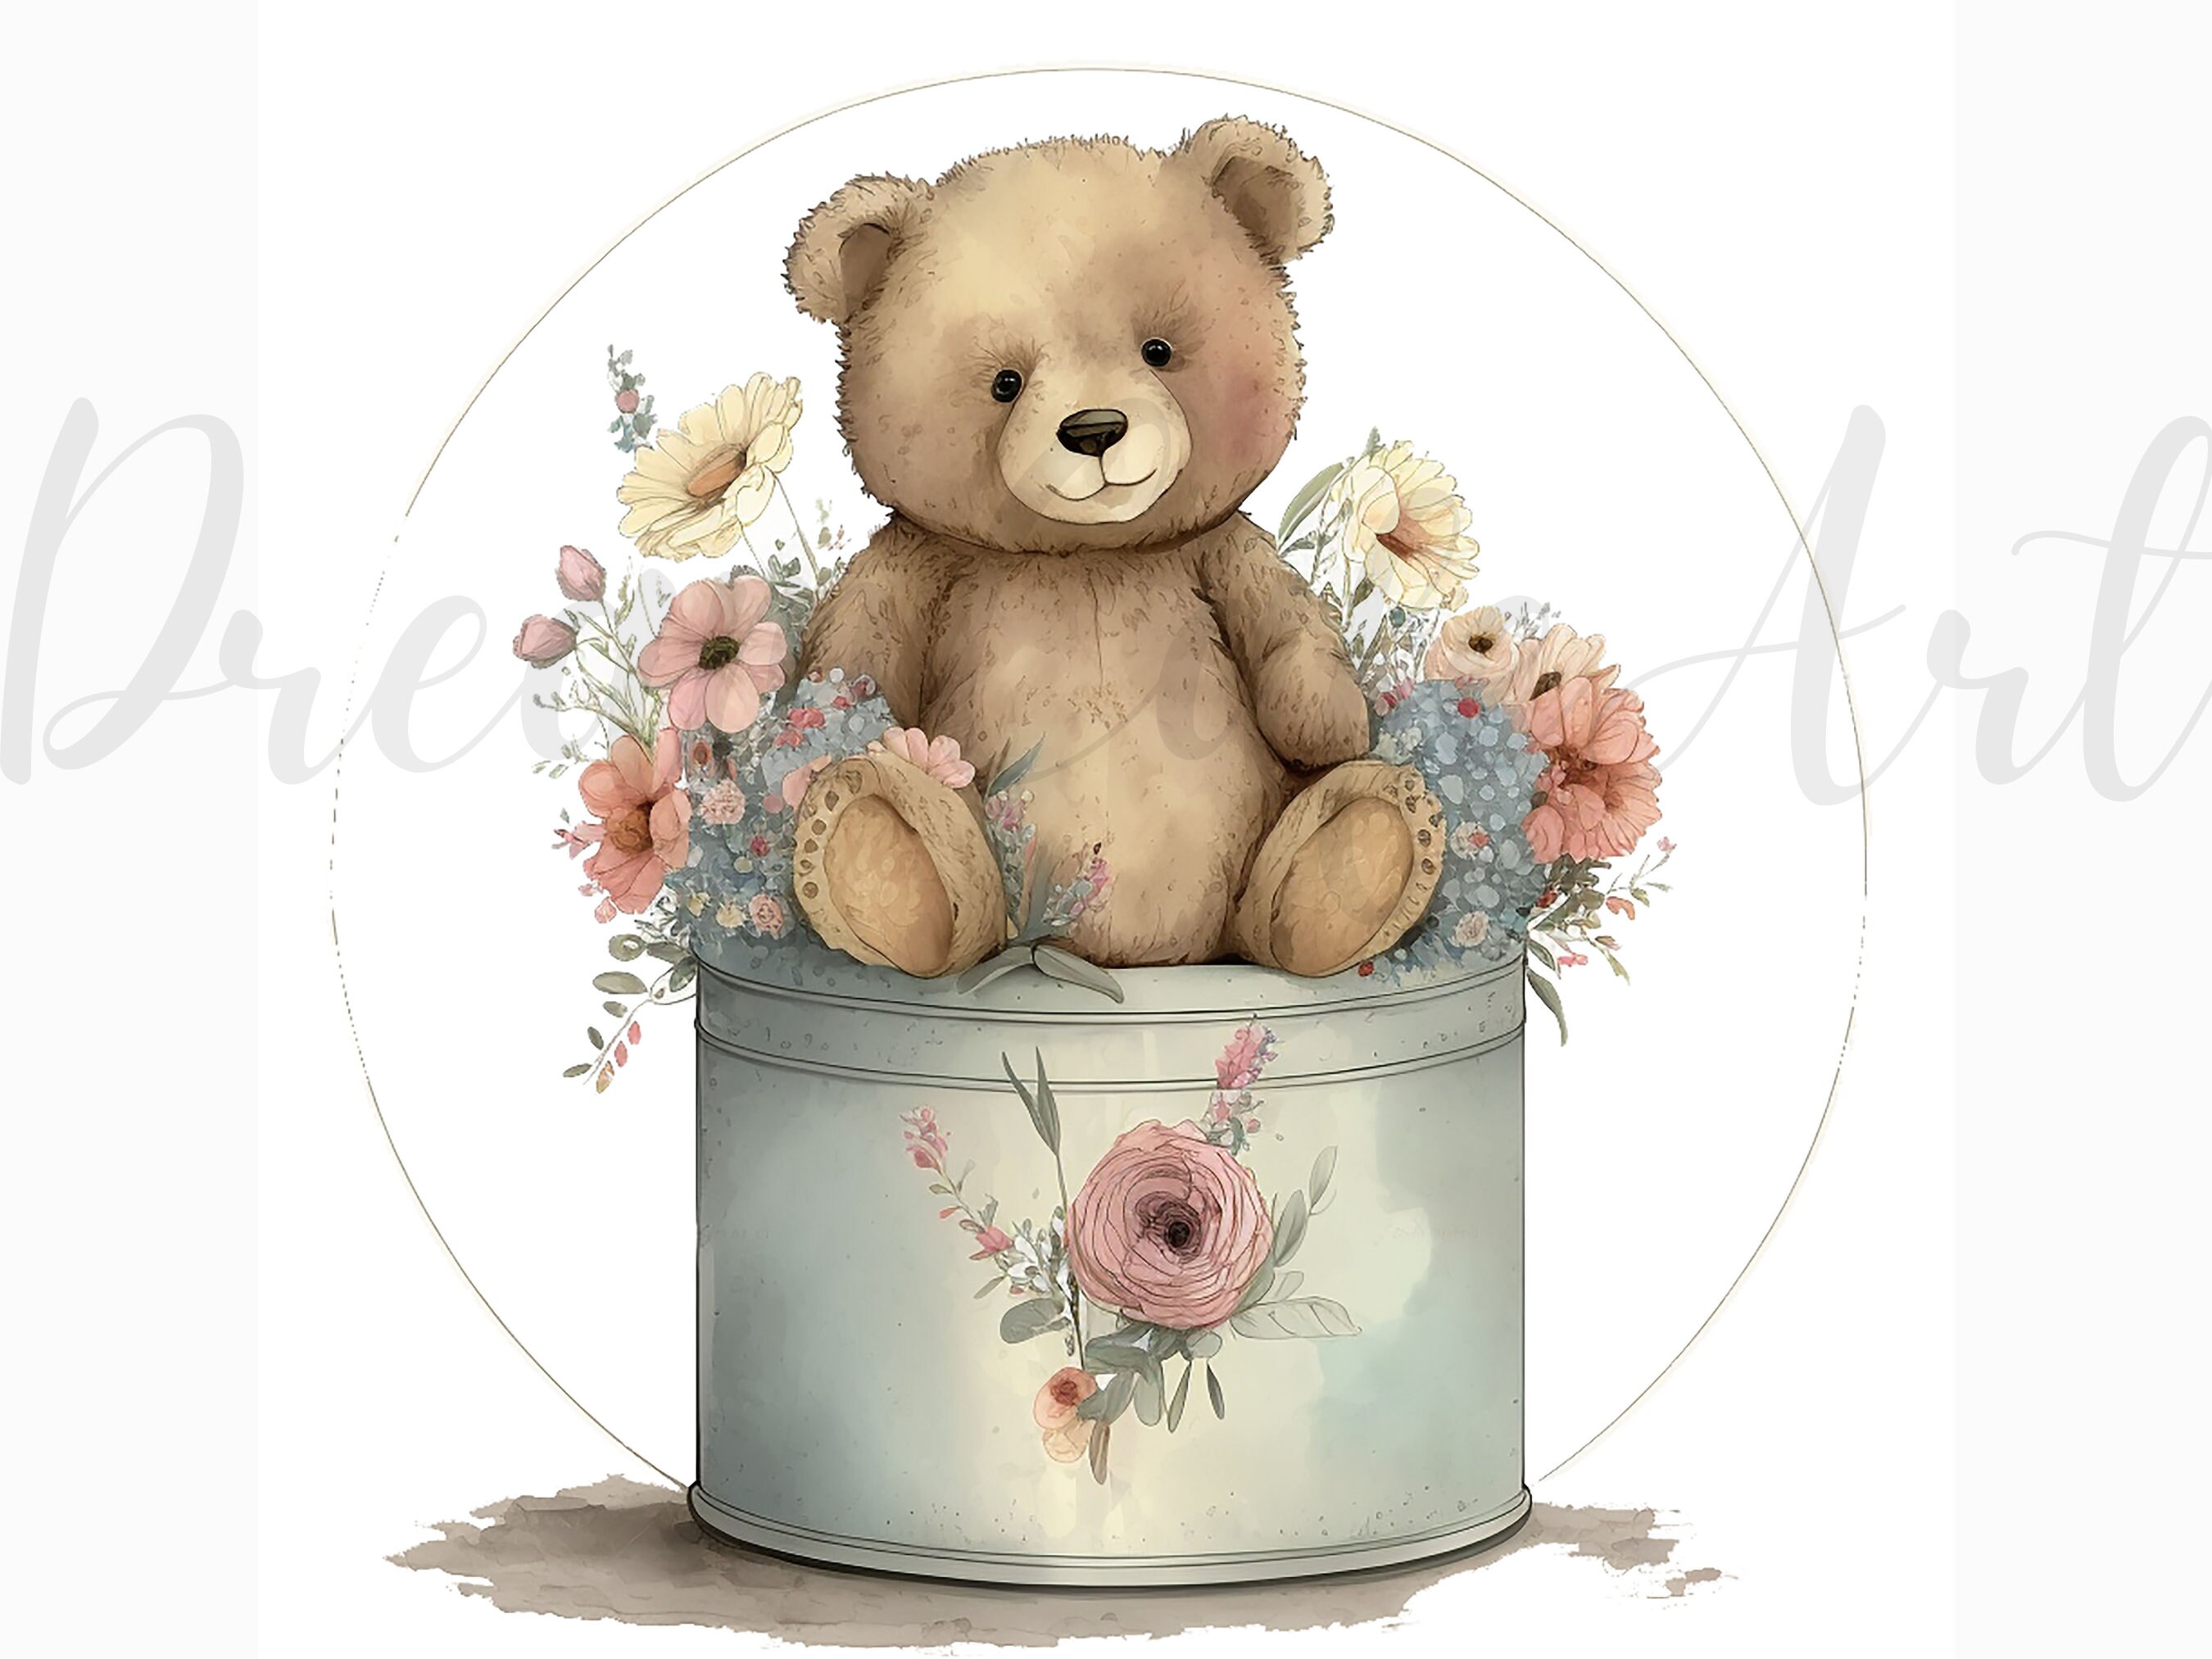 12 Watercolor Teddy Bear Free Commercial Use Digital Images 